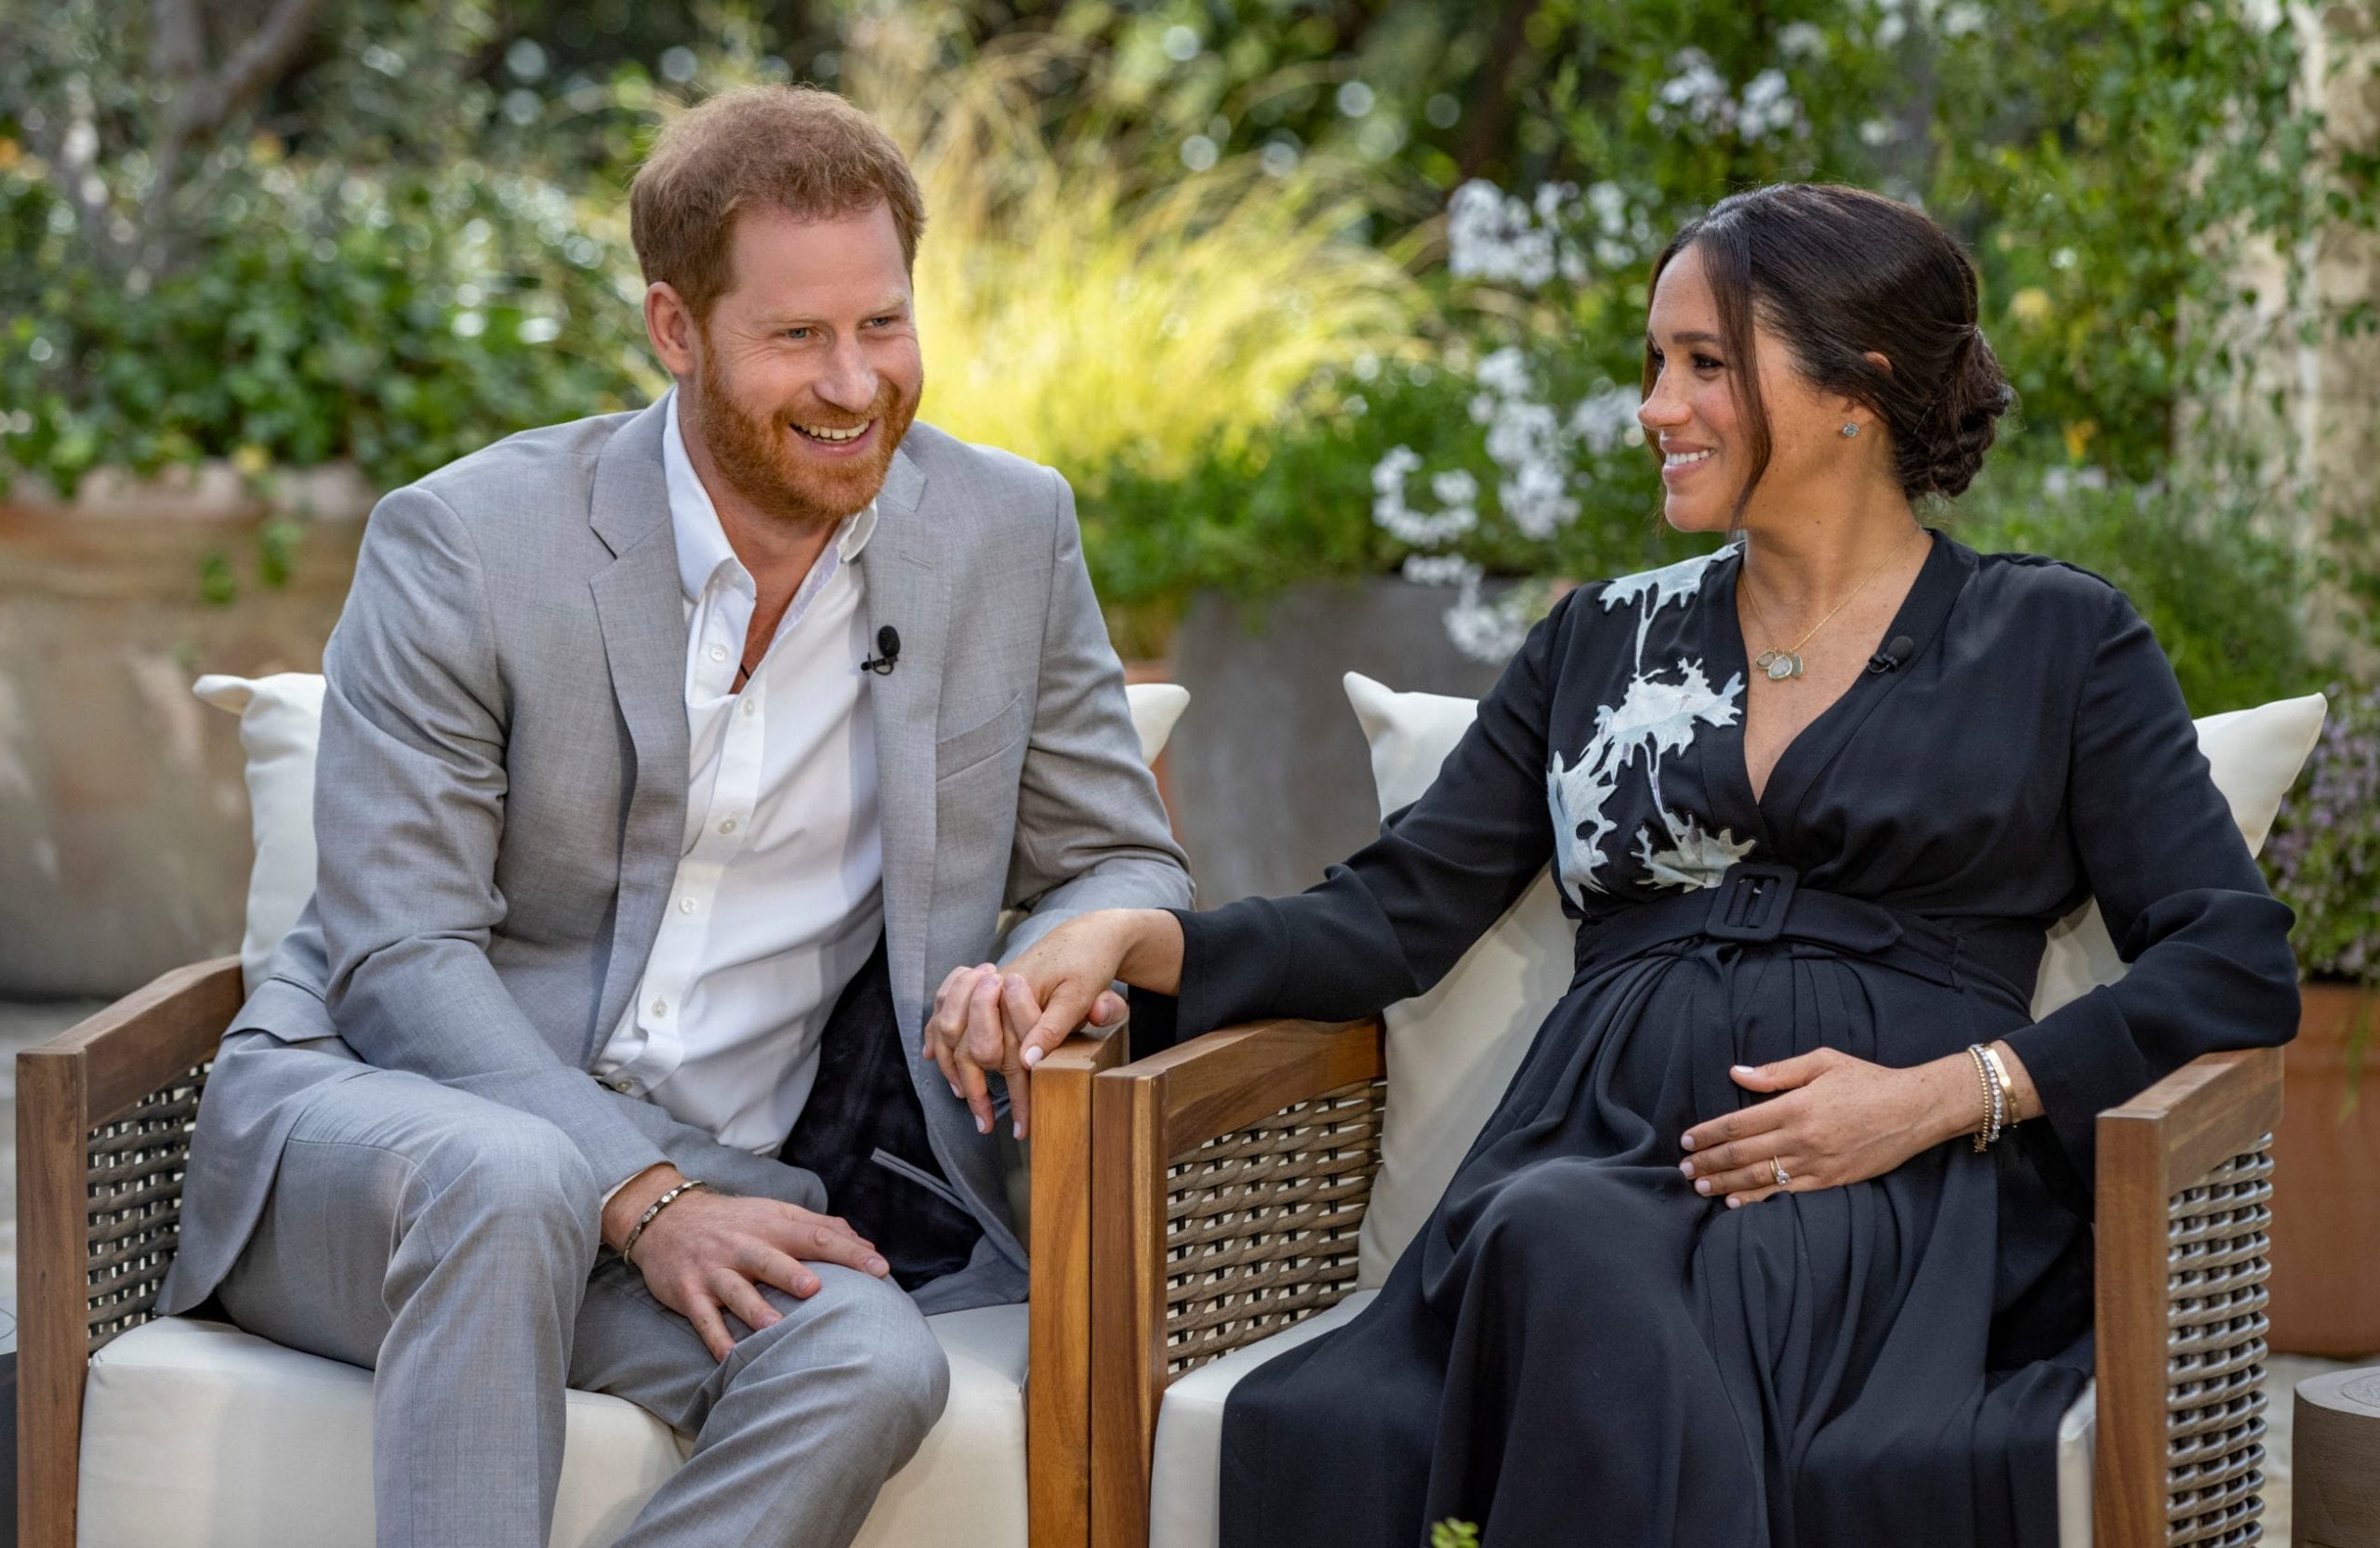 PRINCE HARRY ABOUT HIS MENTAL HEALTH STRUGGLE (Copy)